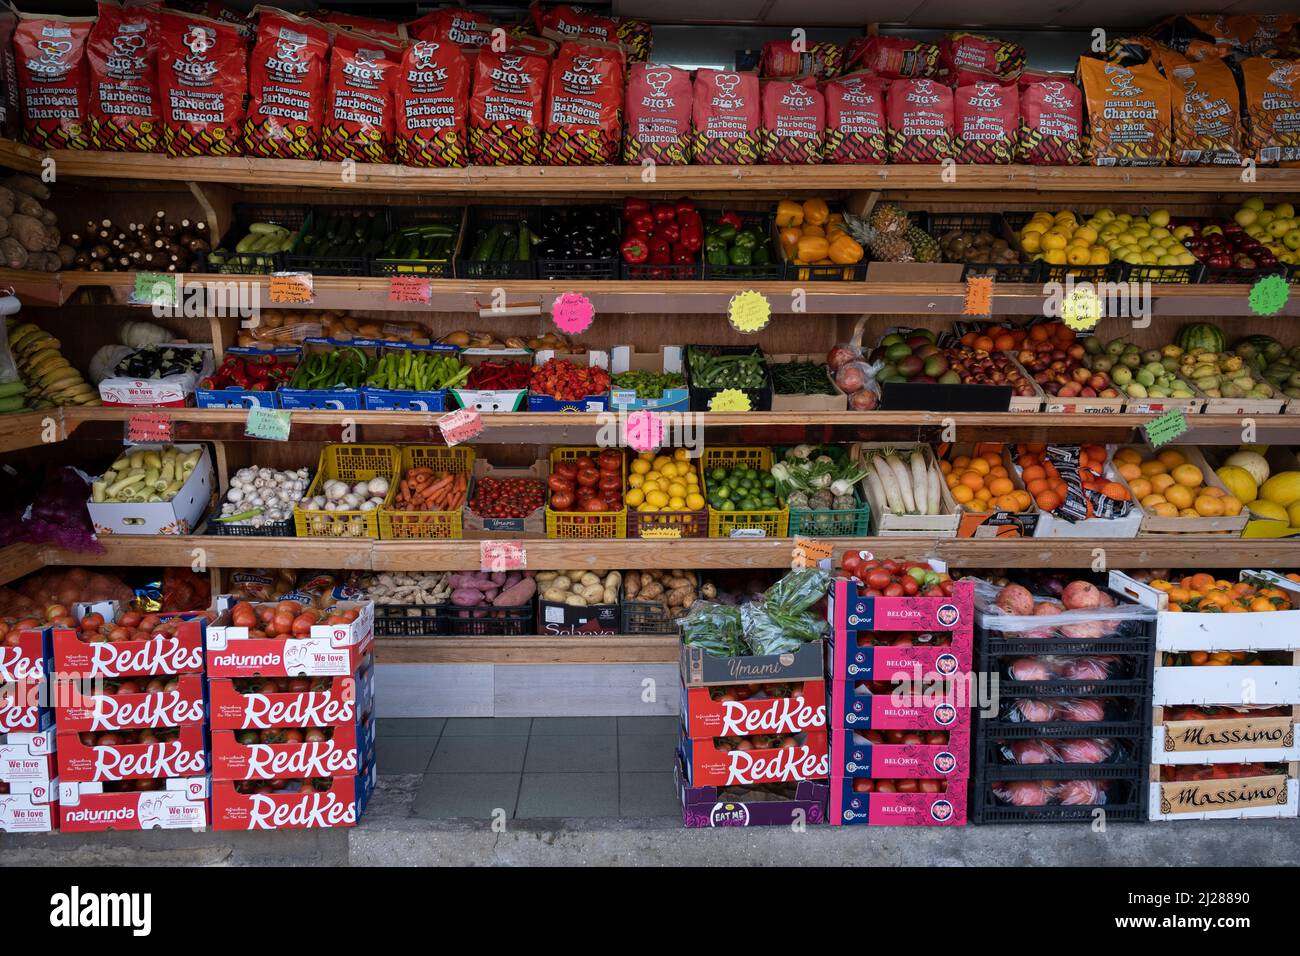 Fruit and vegetable shop on the Old Kent Road on 24th March 2022 in London, United Kingdom. Old Kent Road is a major thoroughfare in South East London passing through the Borough of Southwark. It was originally part of an ancient trackway that was paved by the Romans. It is now part of the A2, a major road from London to the South East coast. Nowadays the surroundings have a run down feel, and while there are many new housing developments, it has a very strong old East End atmosphere, with the more modern twist of a very multicultural population. Stock Photo